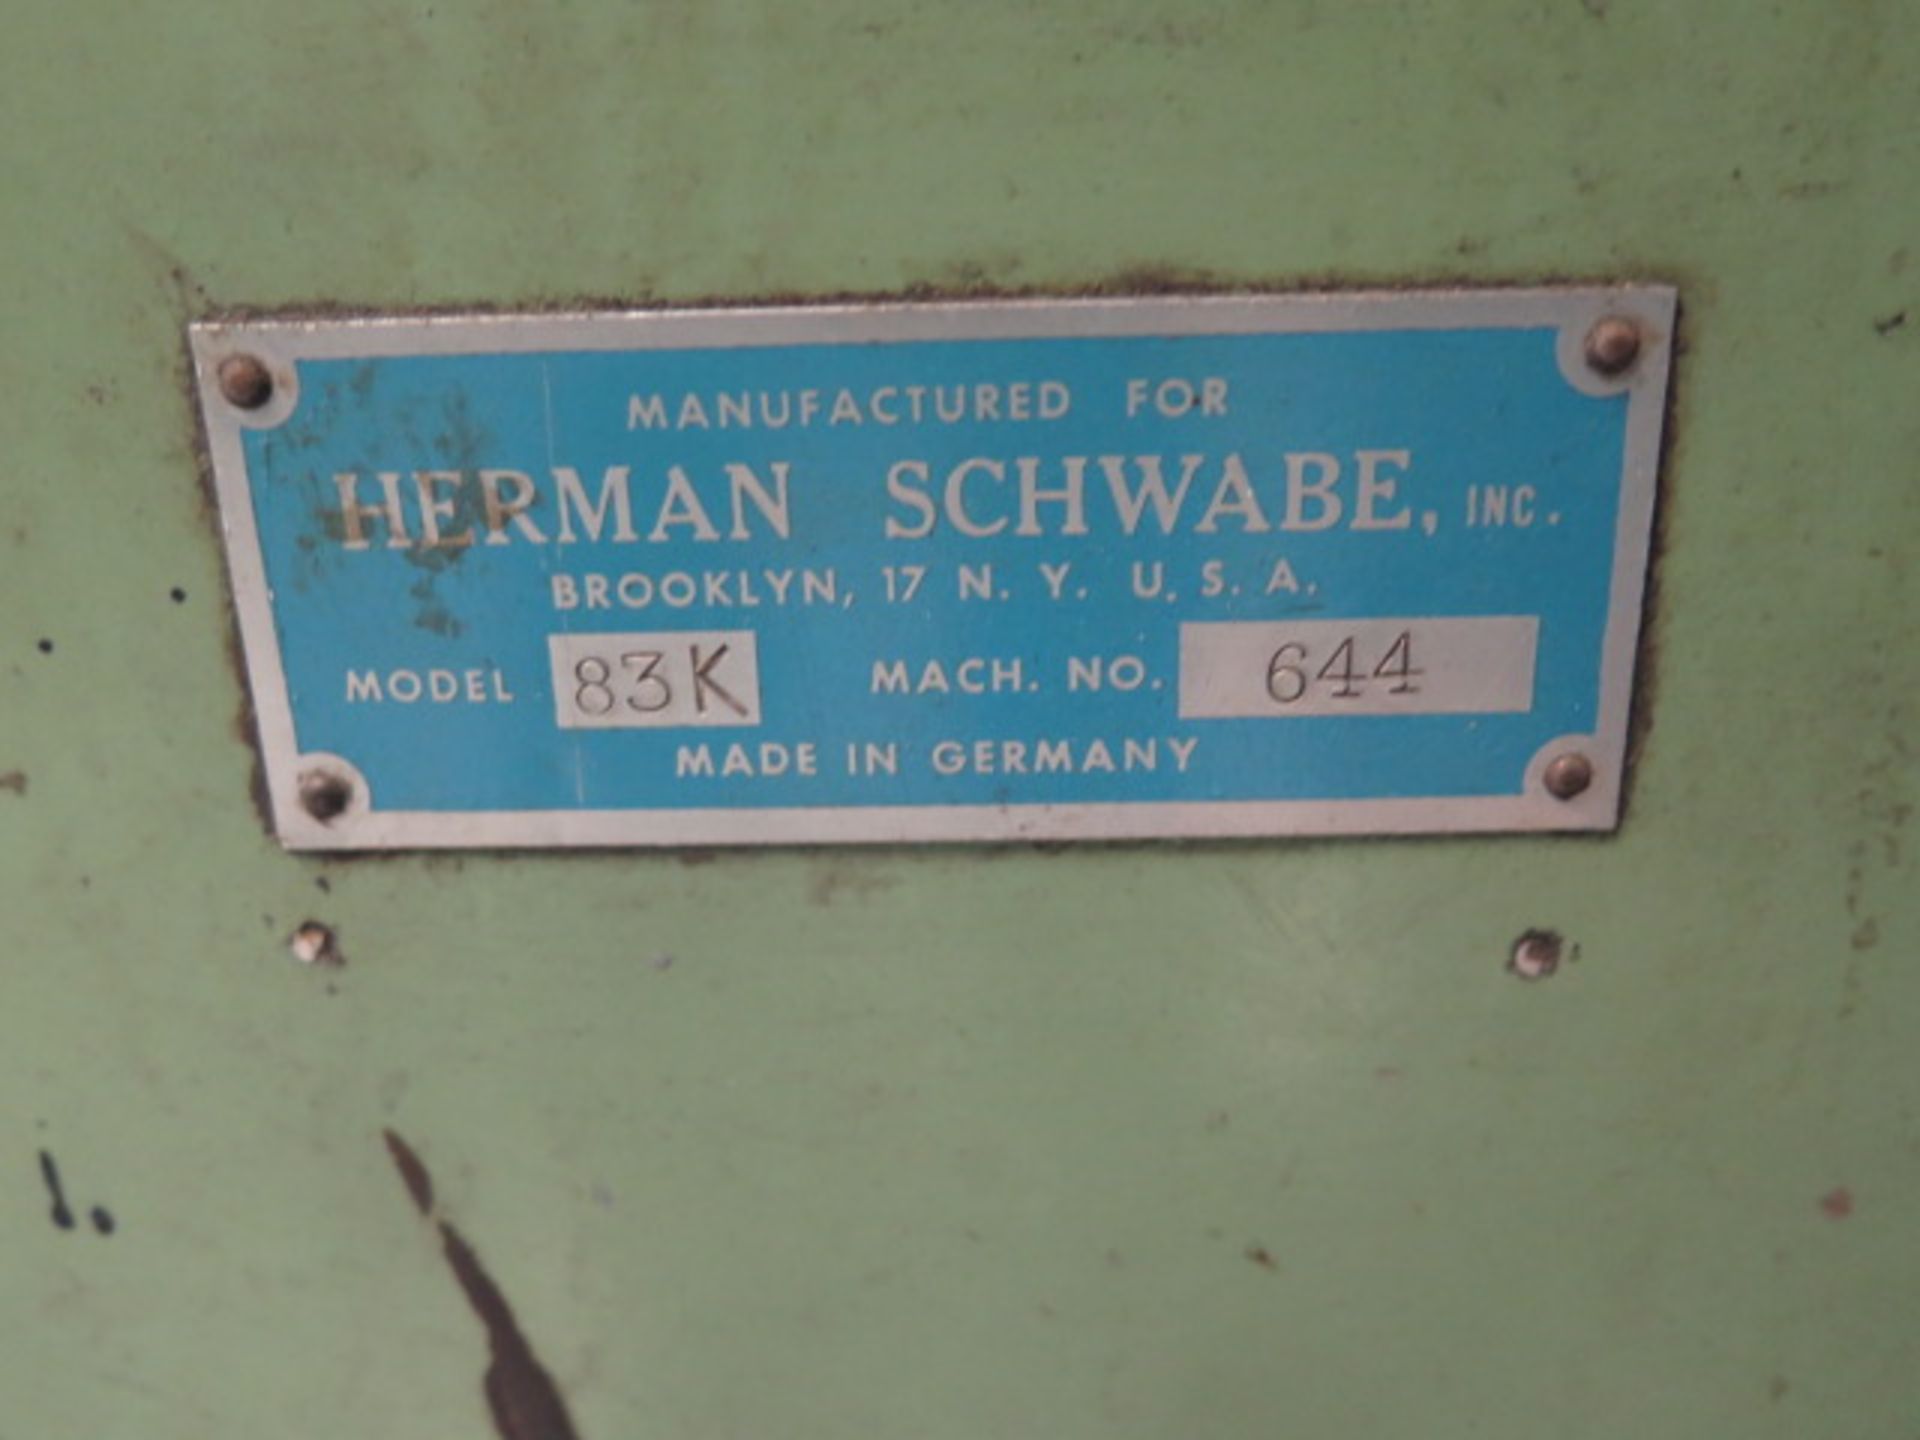 Herman Schwabe mdl. 83K 16” Leather Splitting /Thinning Saw s/n 644 (SOLD AS-IS - NO WARRANTY) - Image 7 of 7